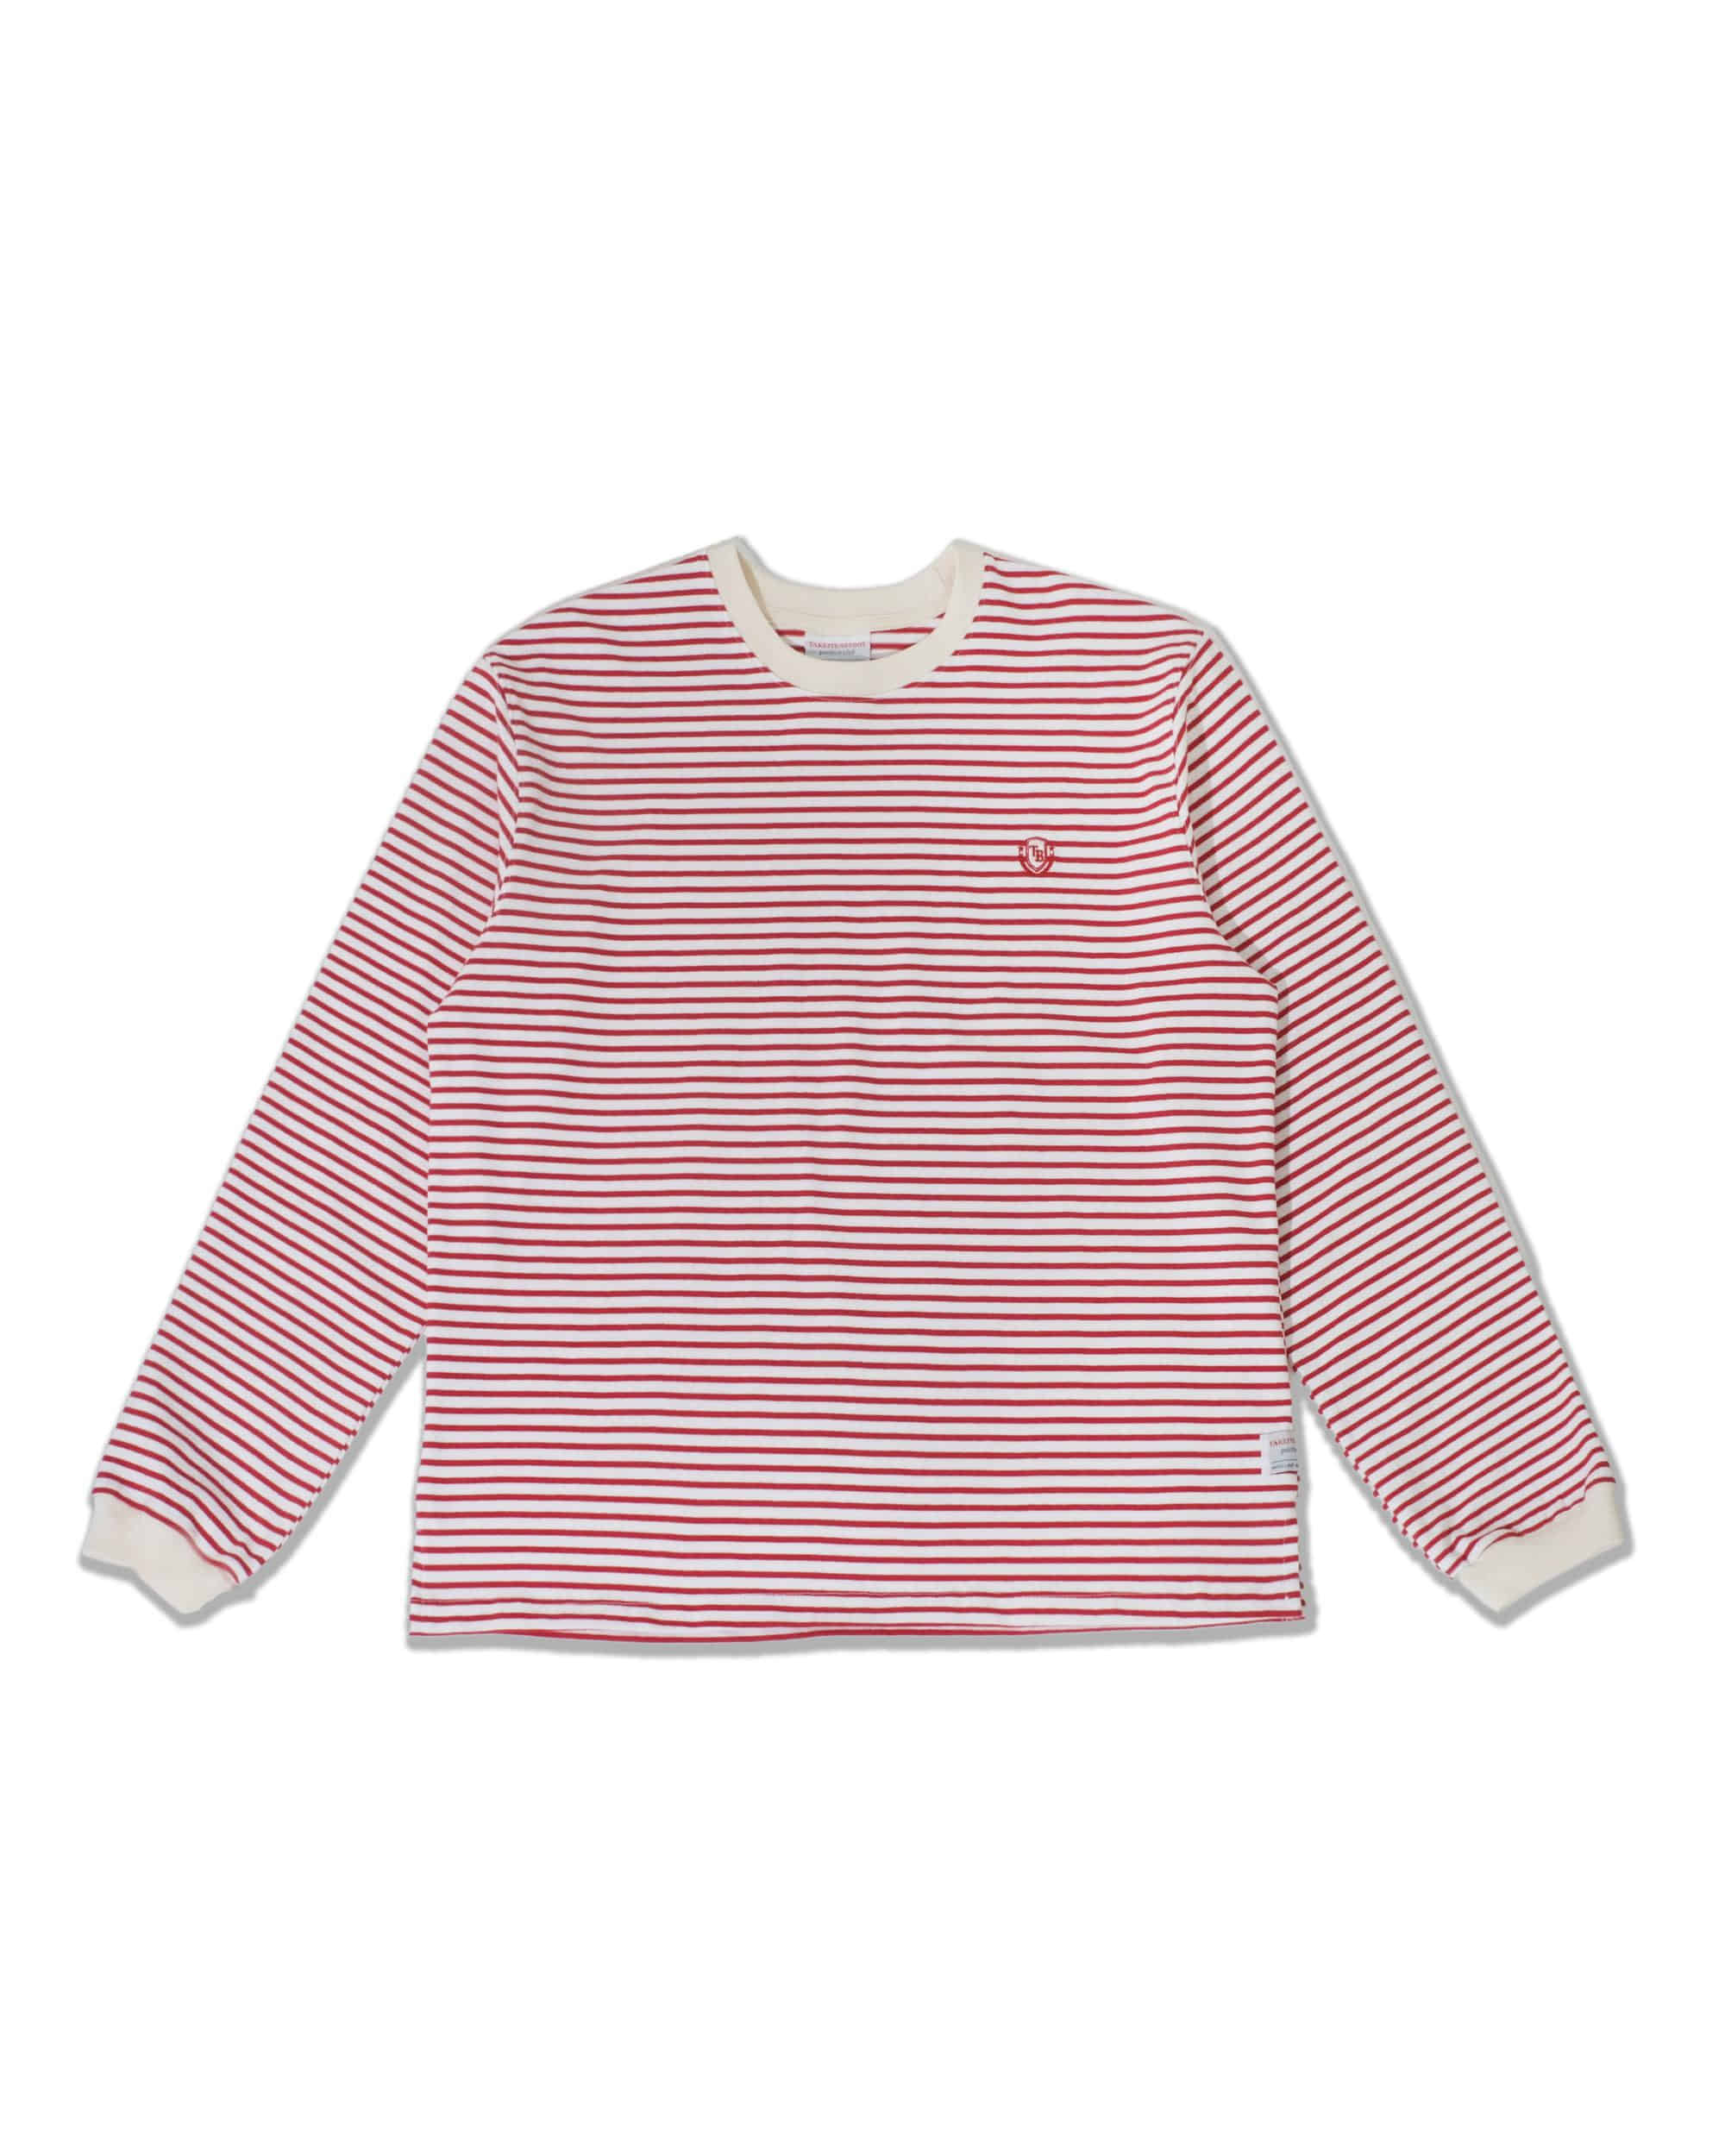 CLASSIC STRIPE LONG SLEEVE / Red